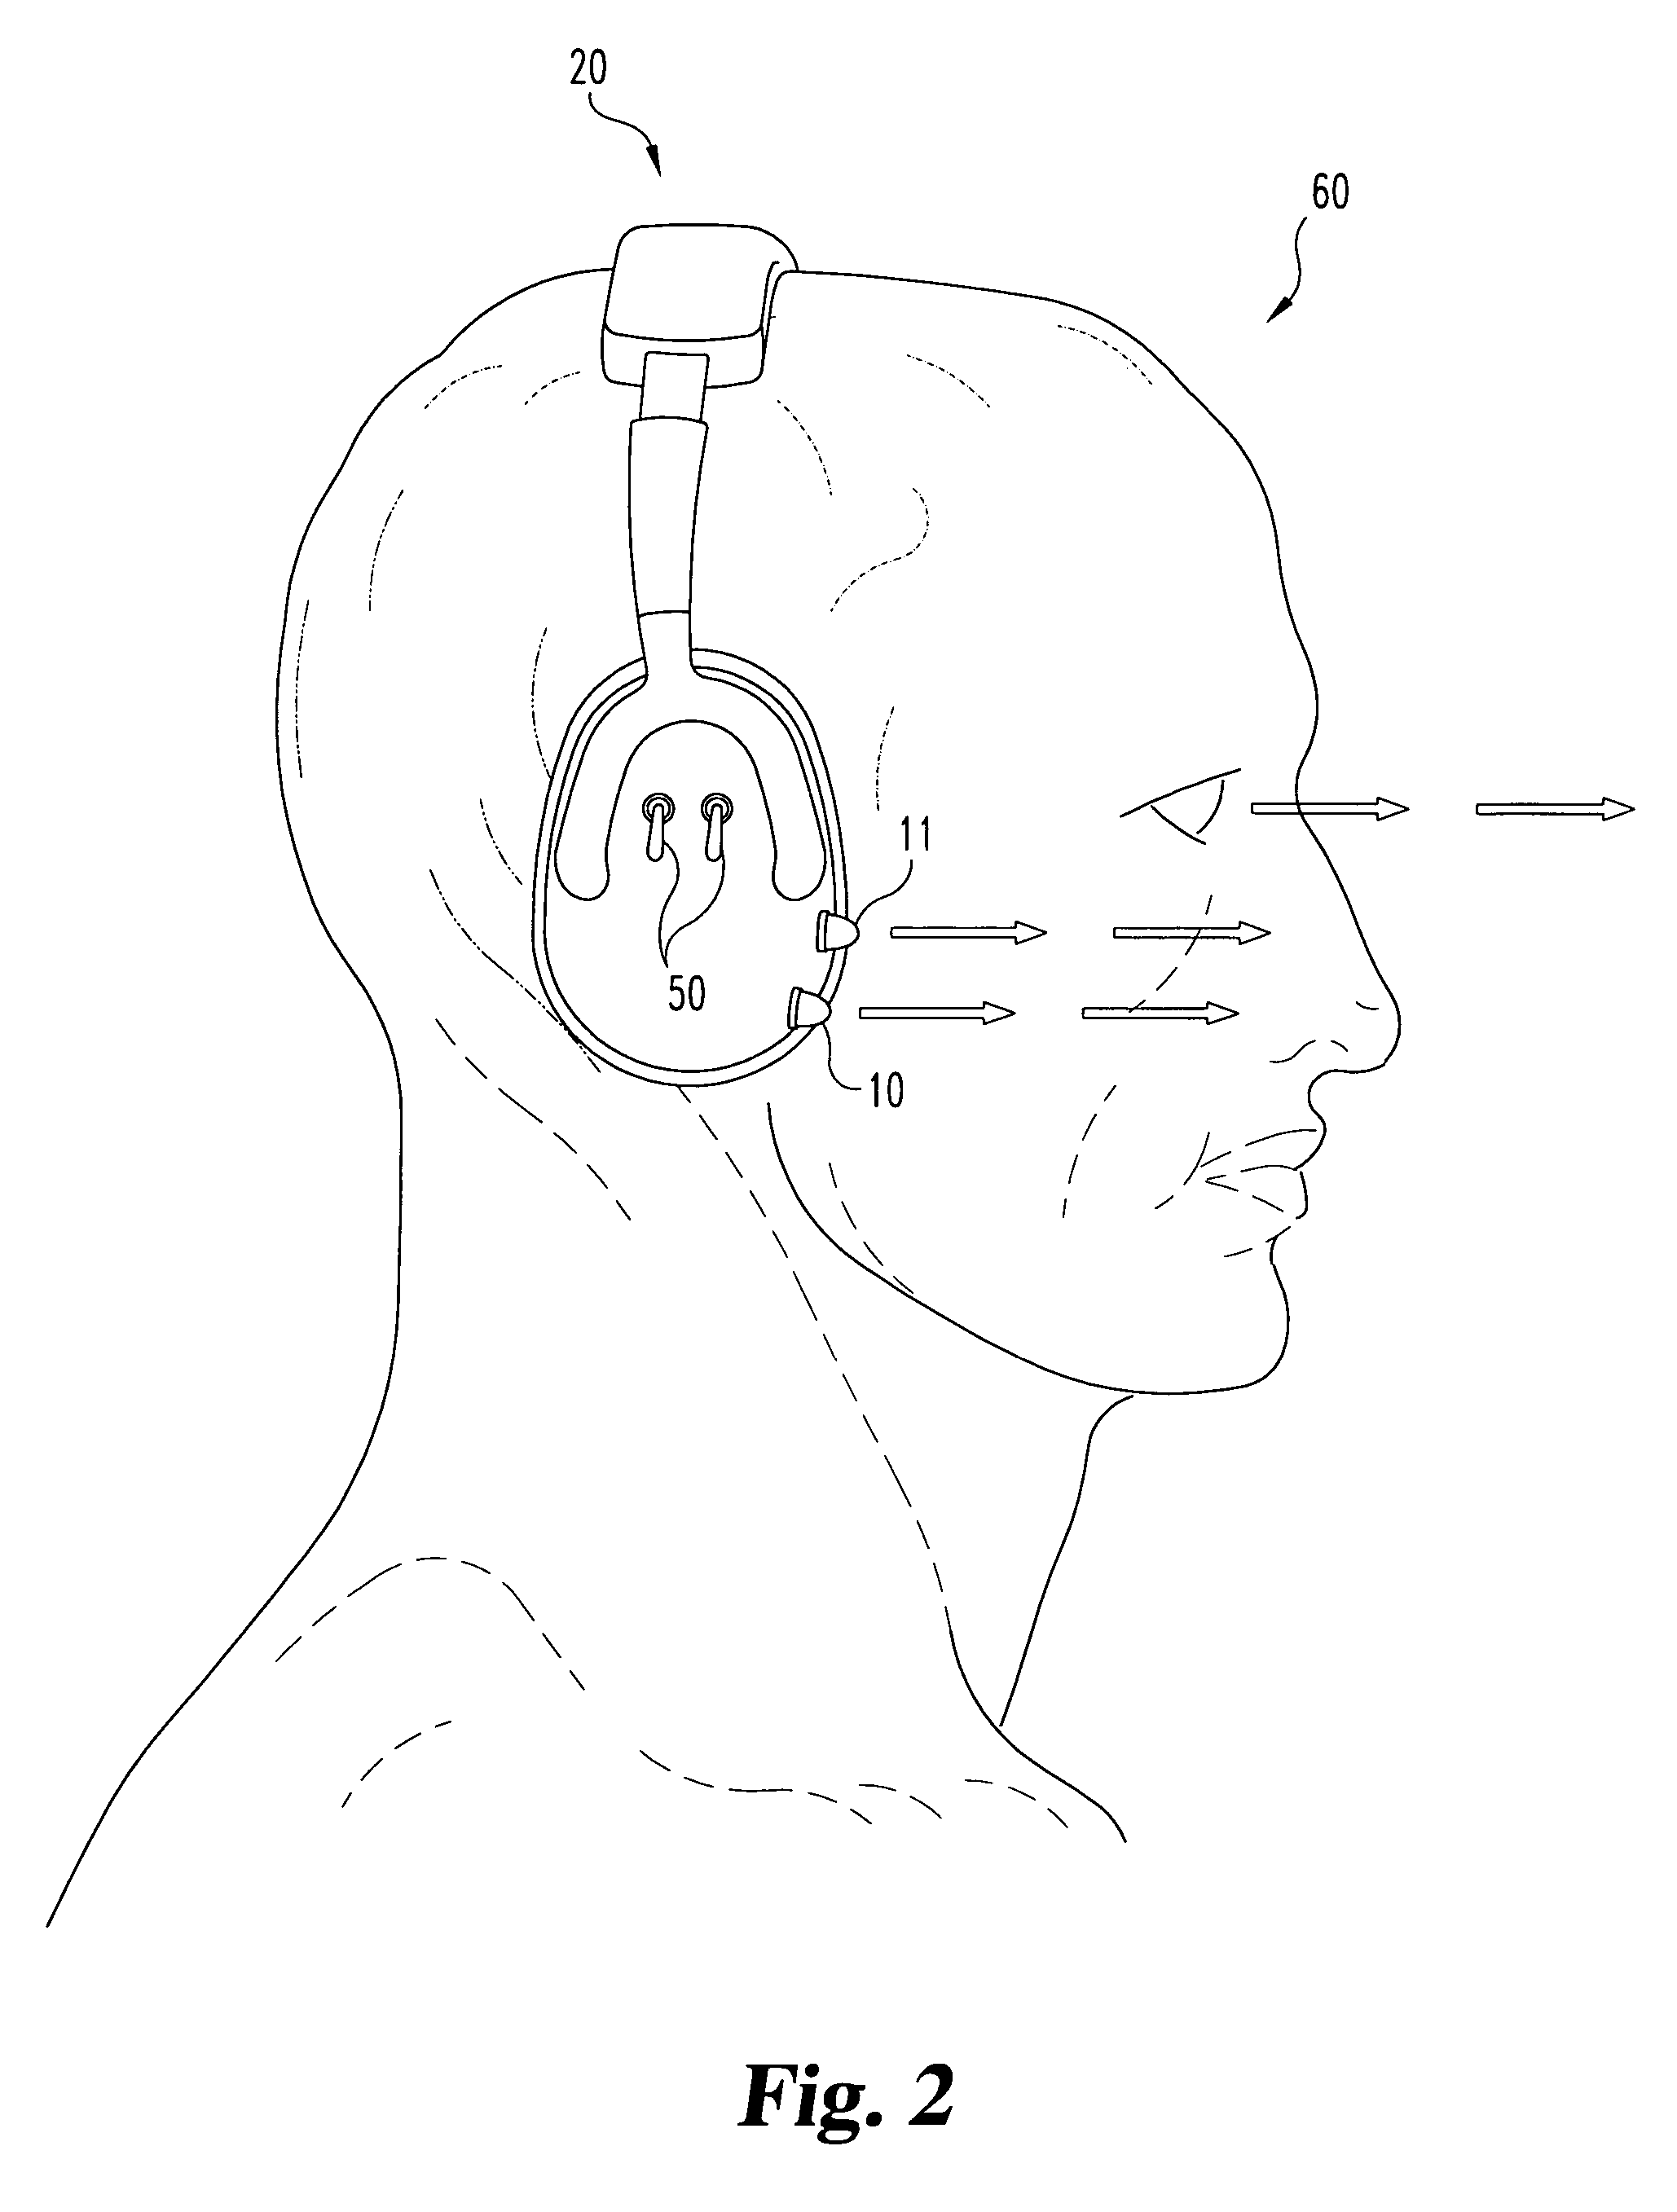 Illumination systems and methods of use